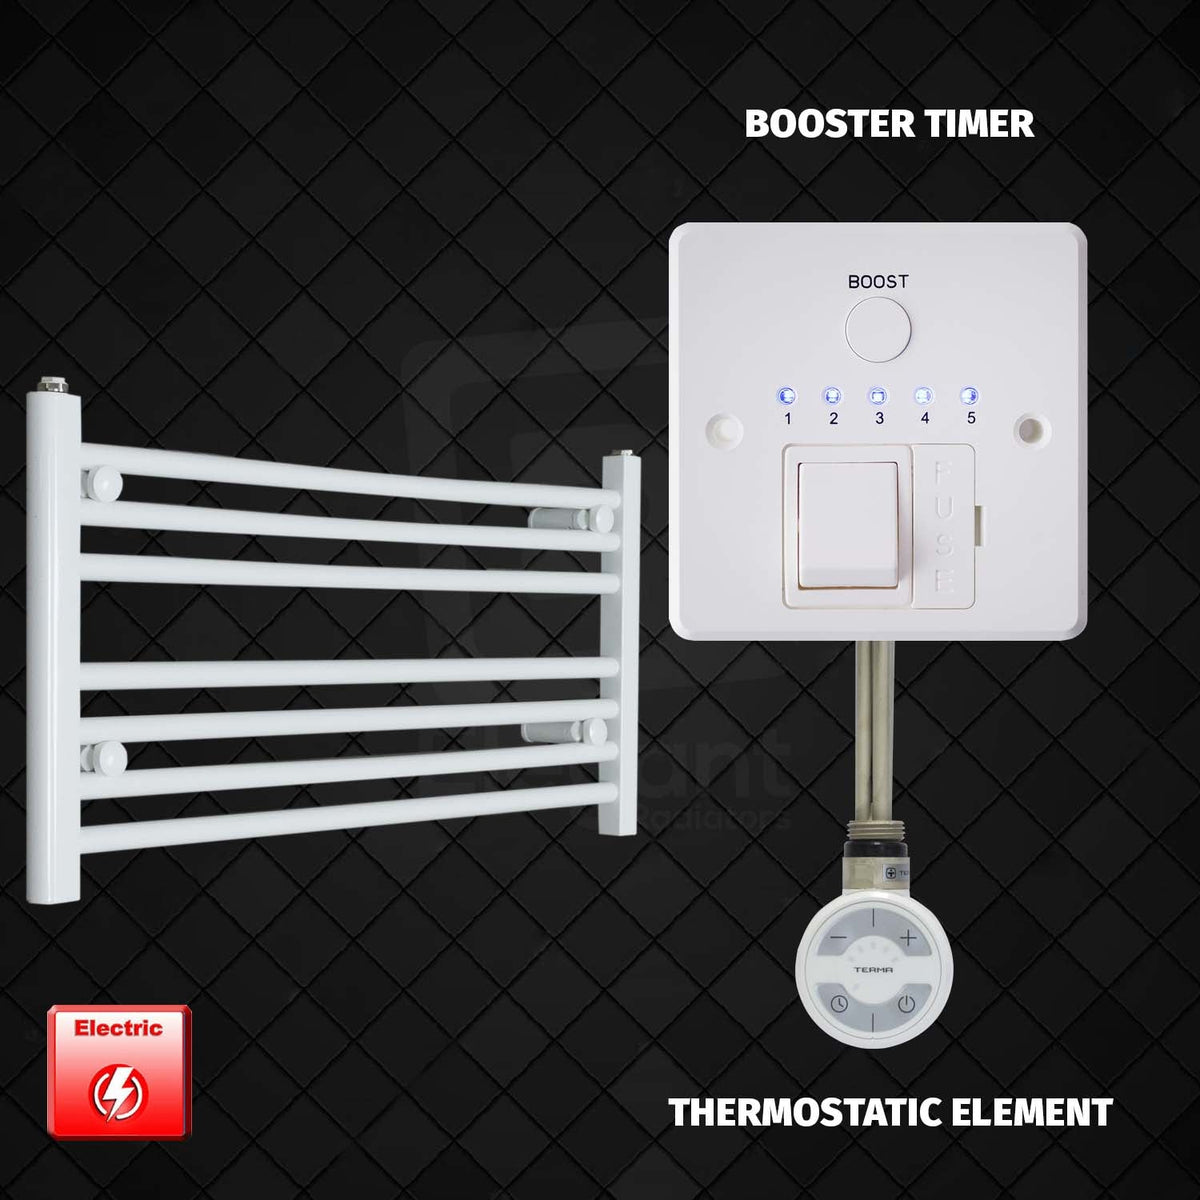 400 mm High 800 mm Wide Pre-Filled Electric Heated Towel Radiator White HTR MOA Thermostatic element Booster timer